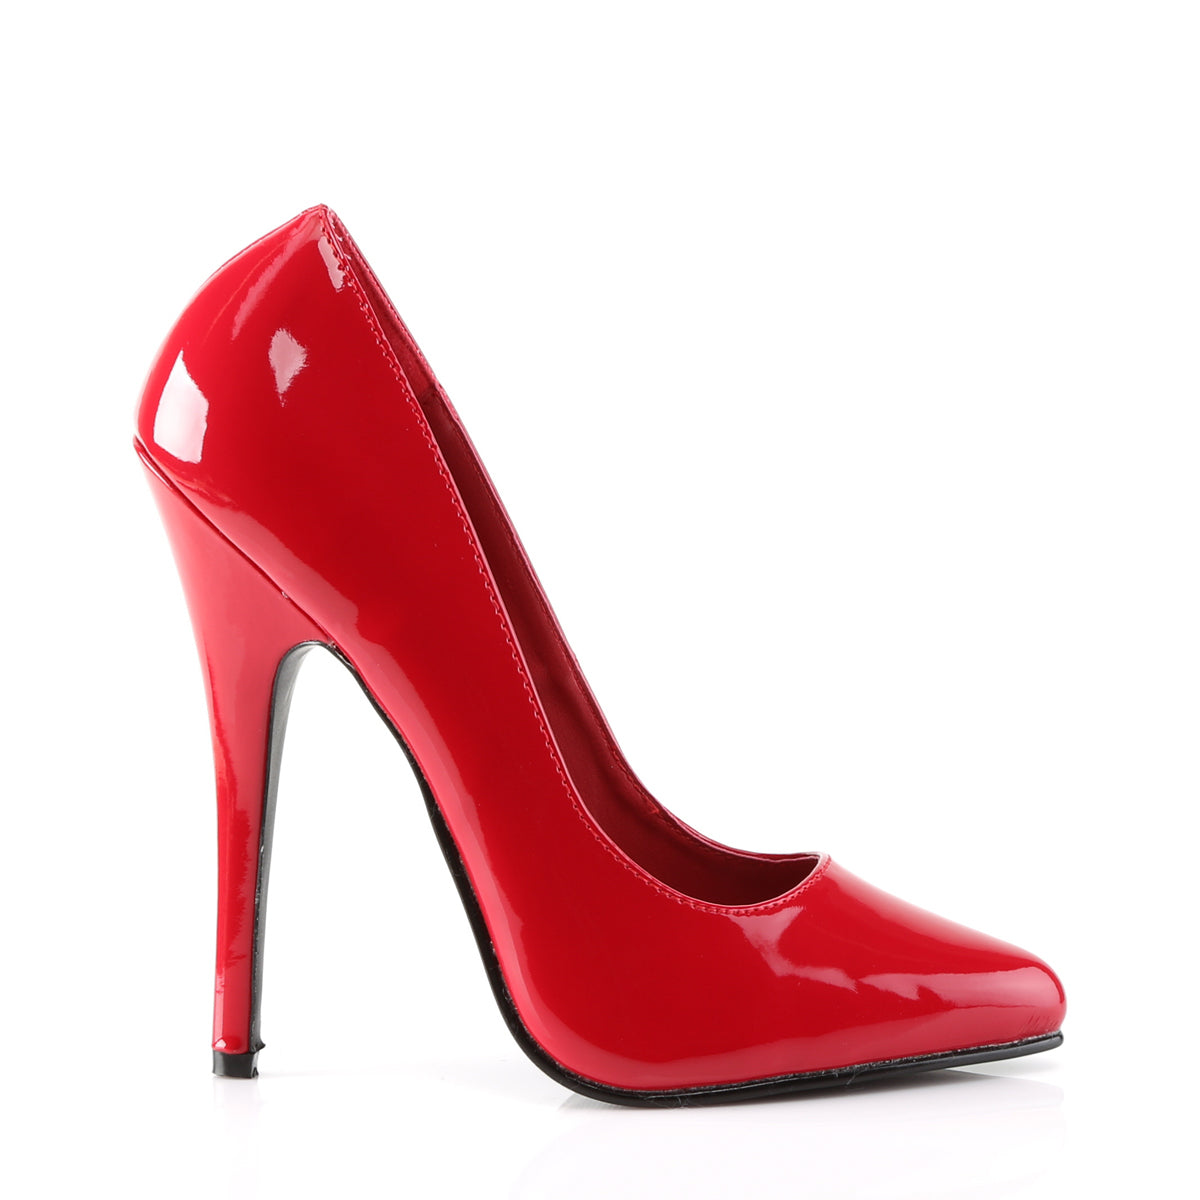 DOMINA-420 Red Patent Devious